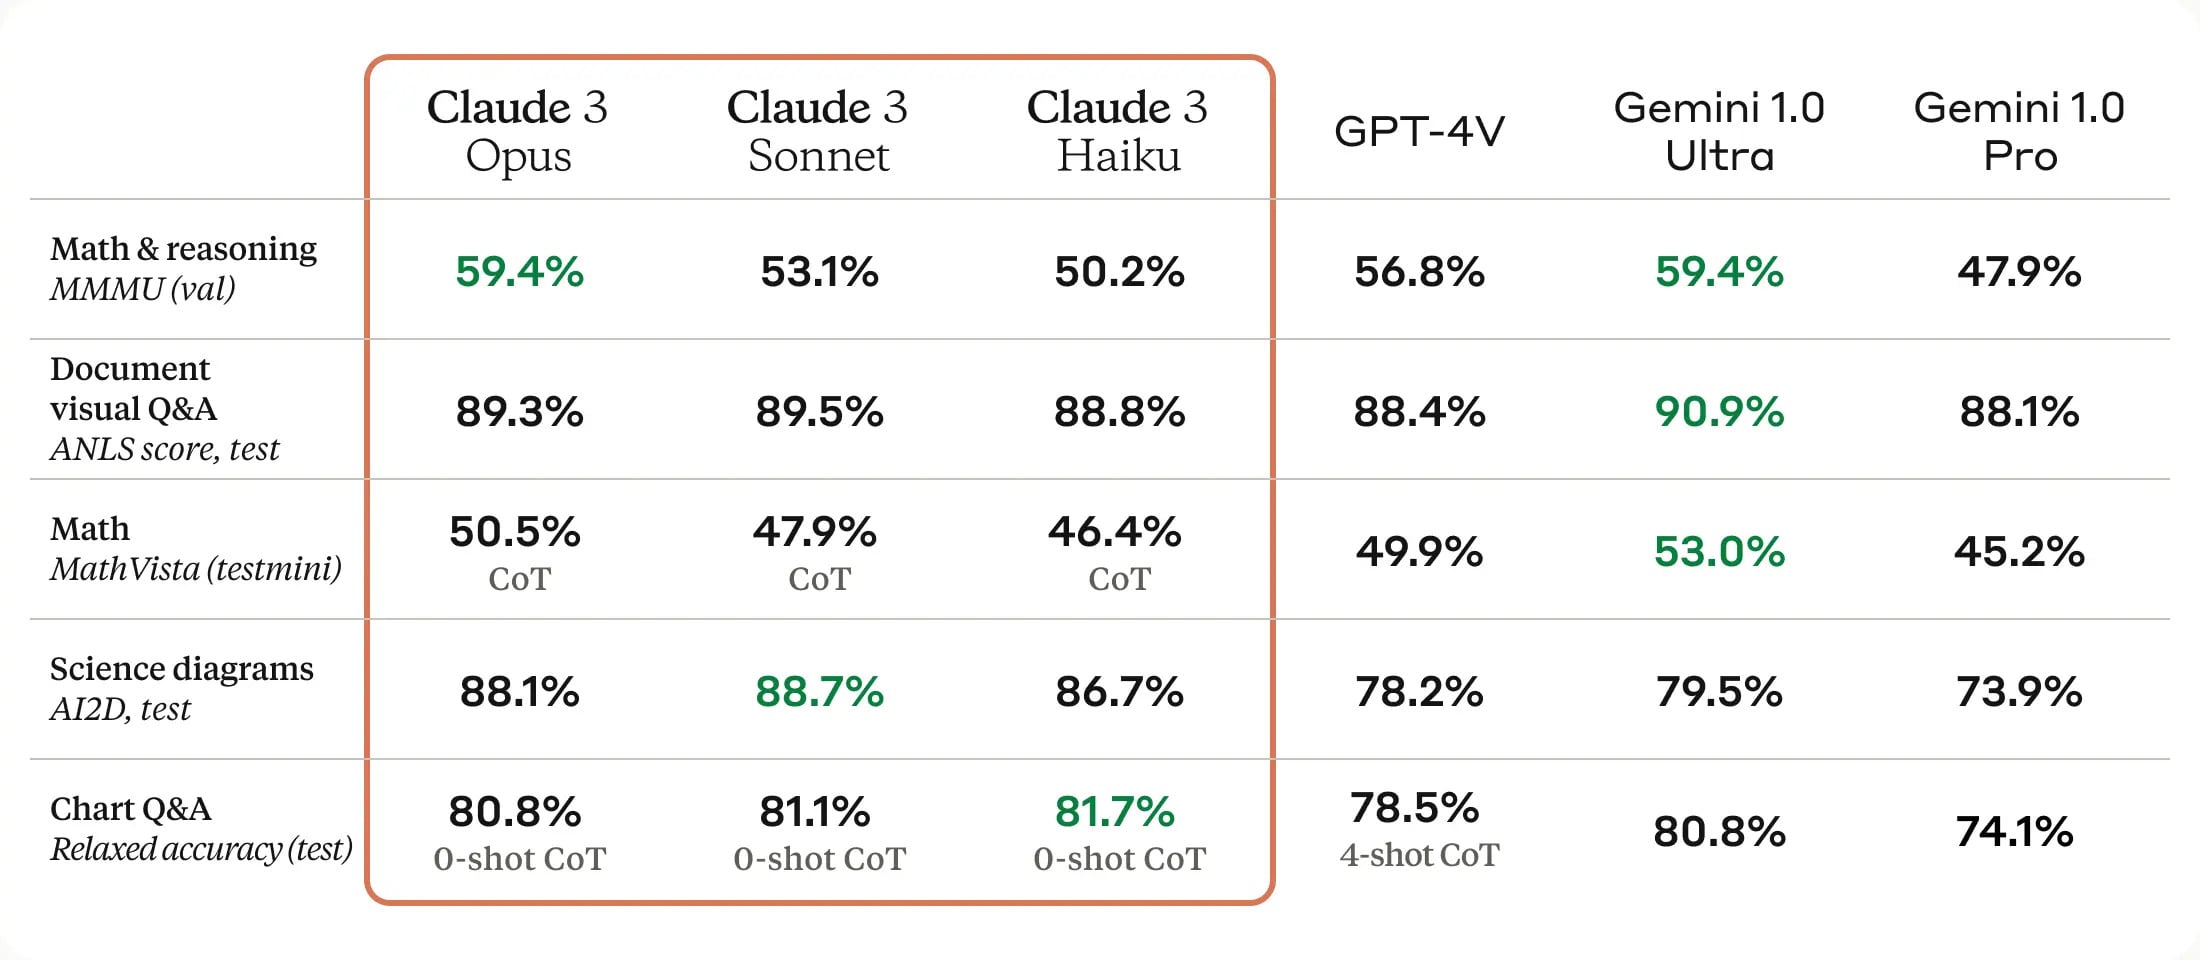 Claude-3-among-its-competitors-at-a-glance